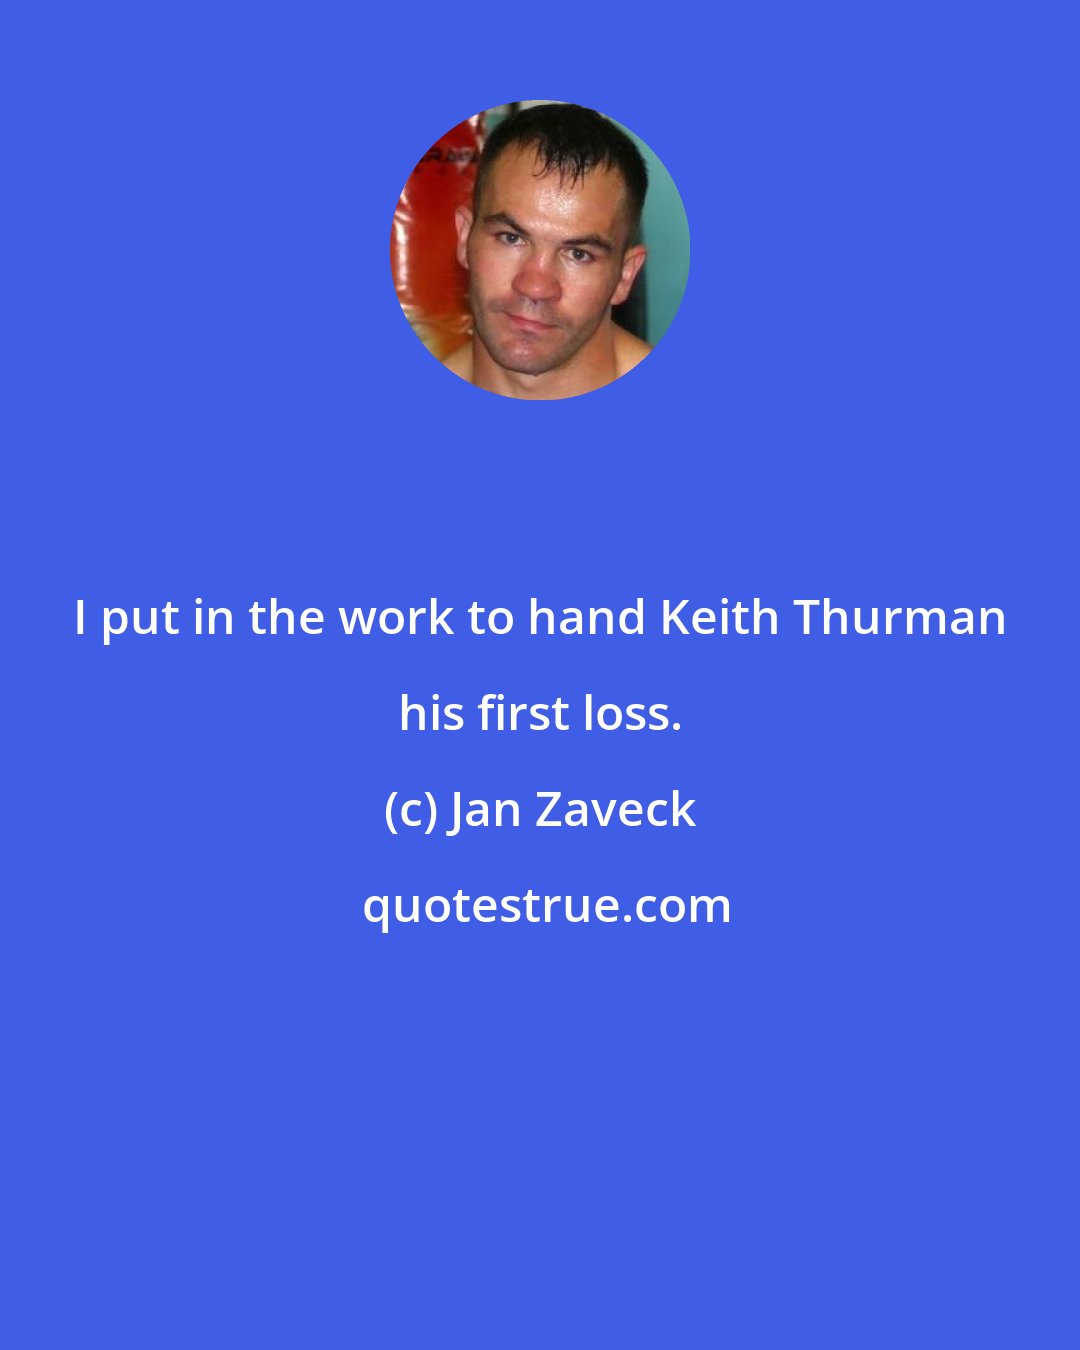 Jan Zaveck: I put in the work to hand Keith Thurman his first loss.